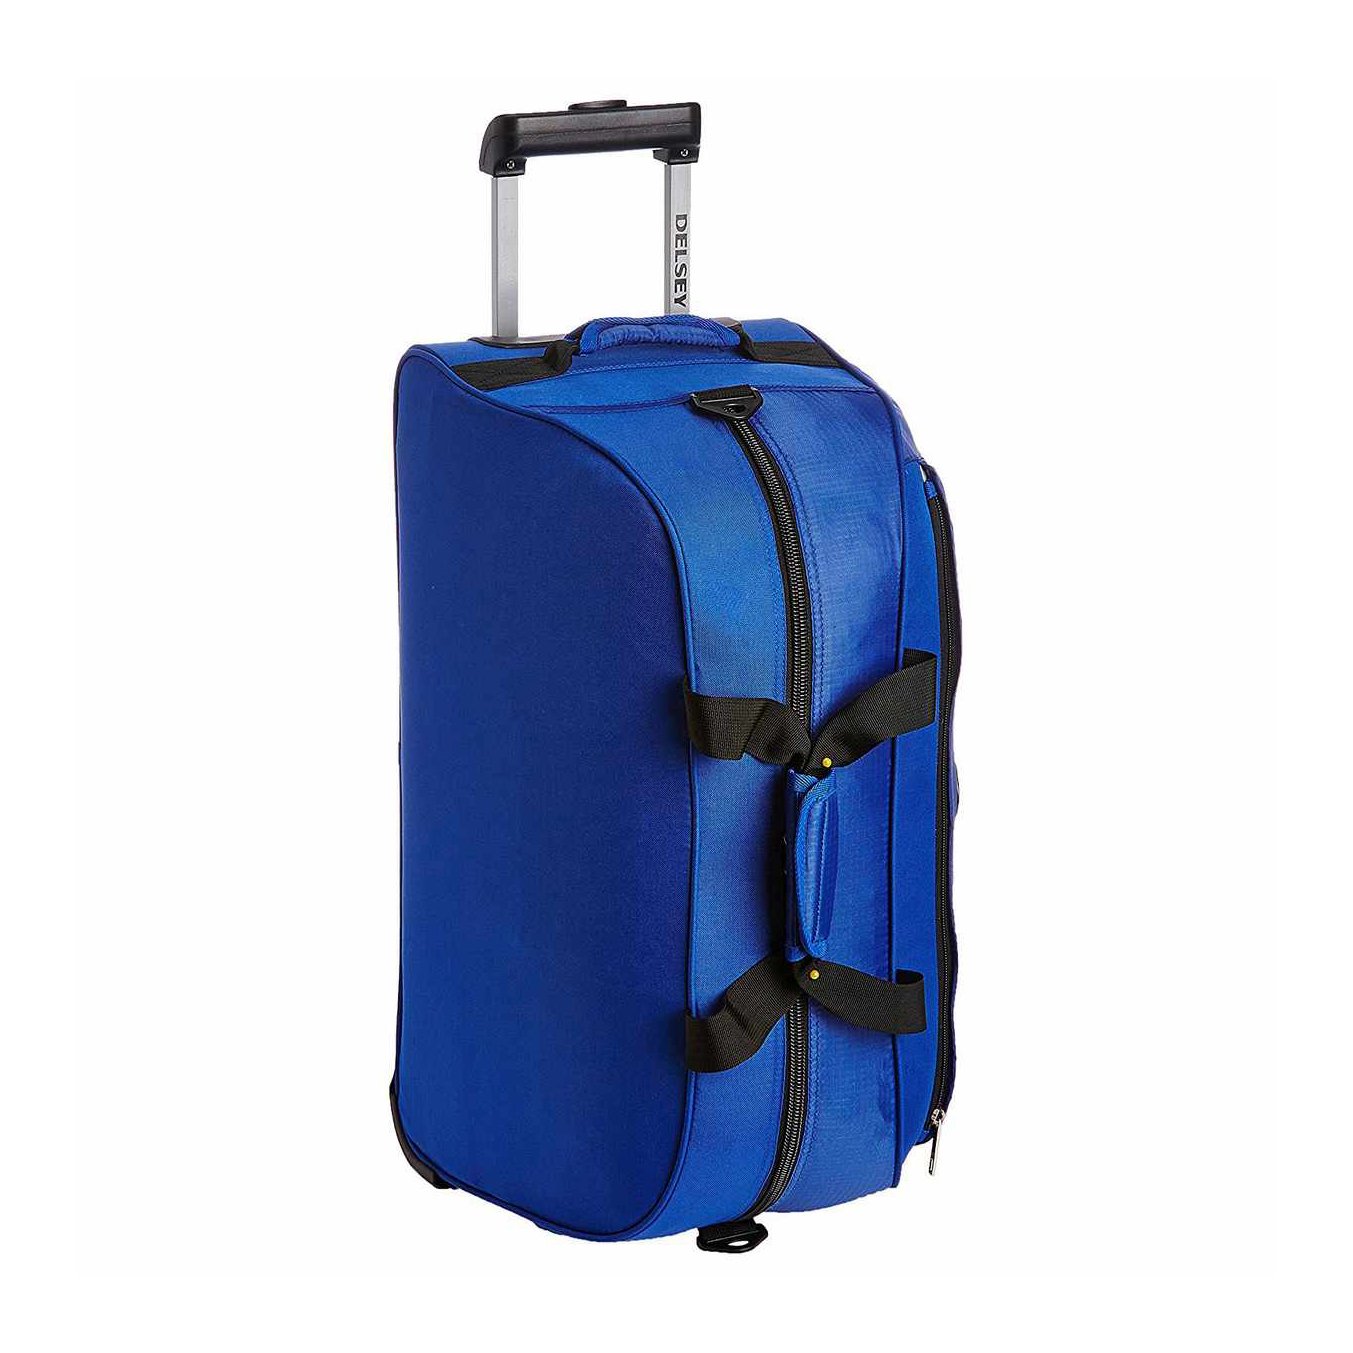 Delsey Move 65cm Duffle Trolley Bag-Sunrise Trading Co.